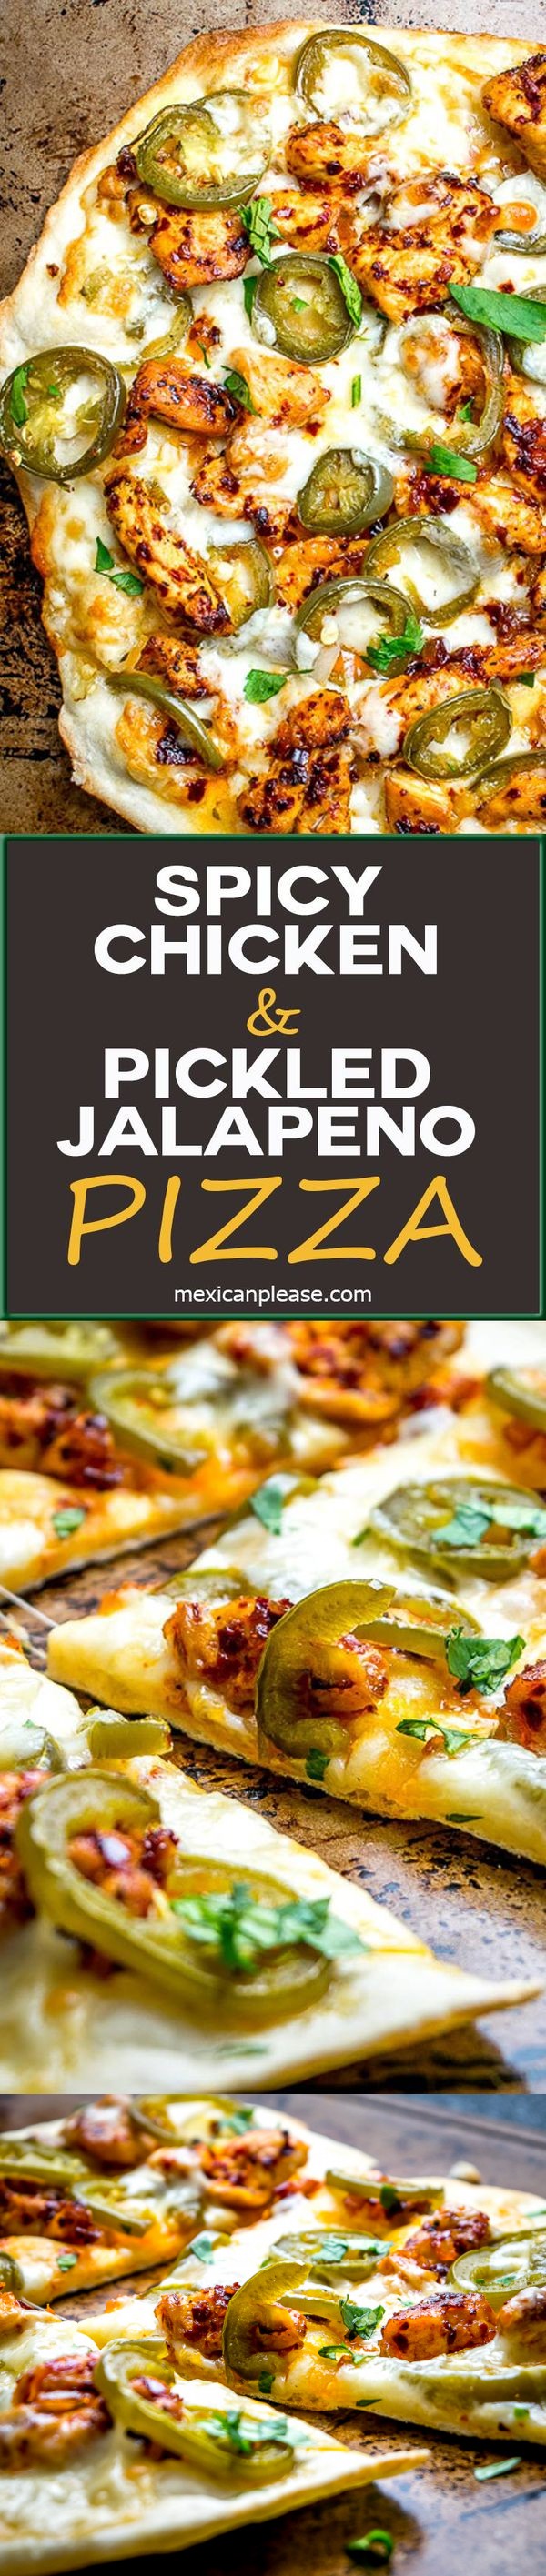 Spicy Chicken and Pickled Jalapeno Pizza